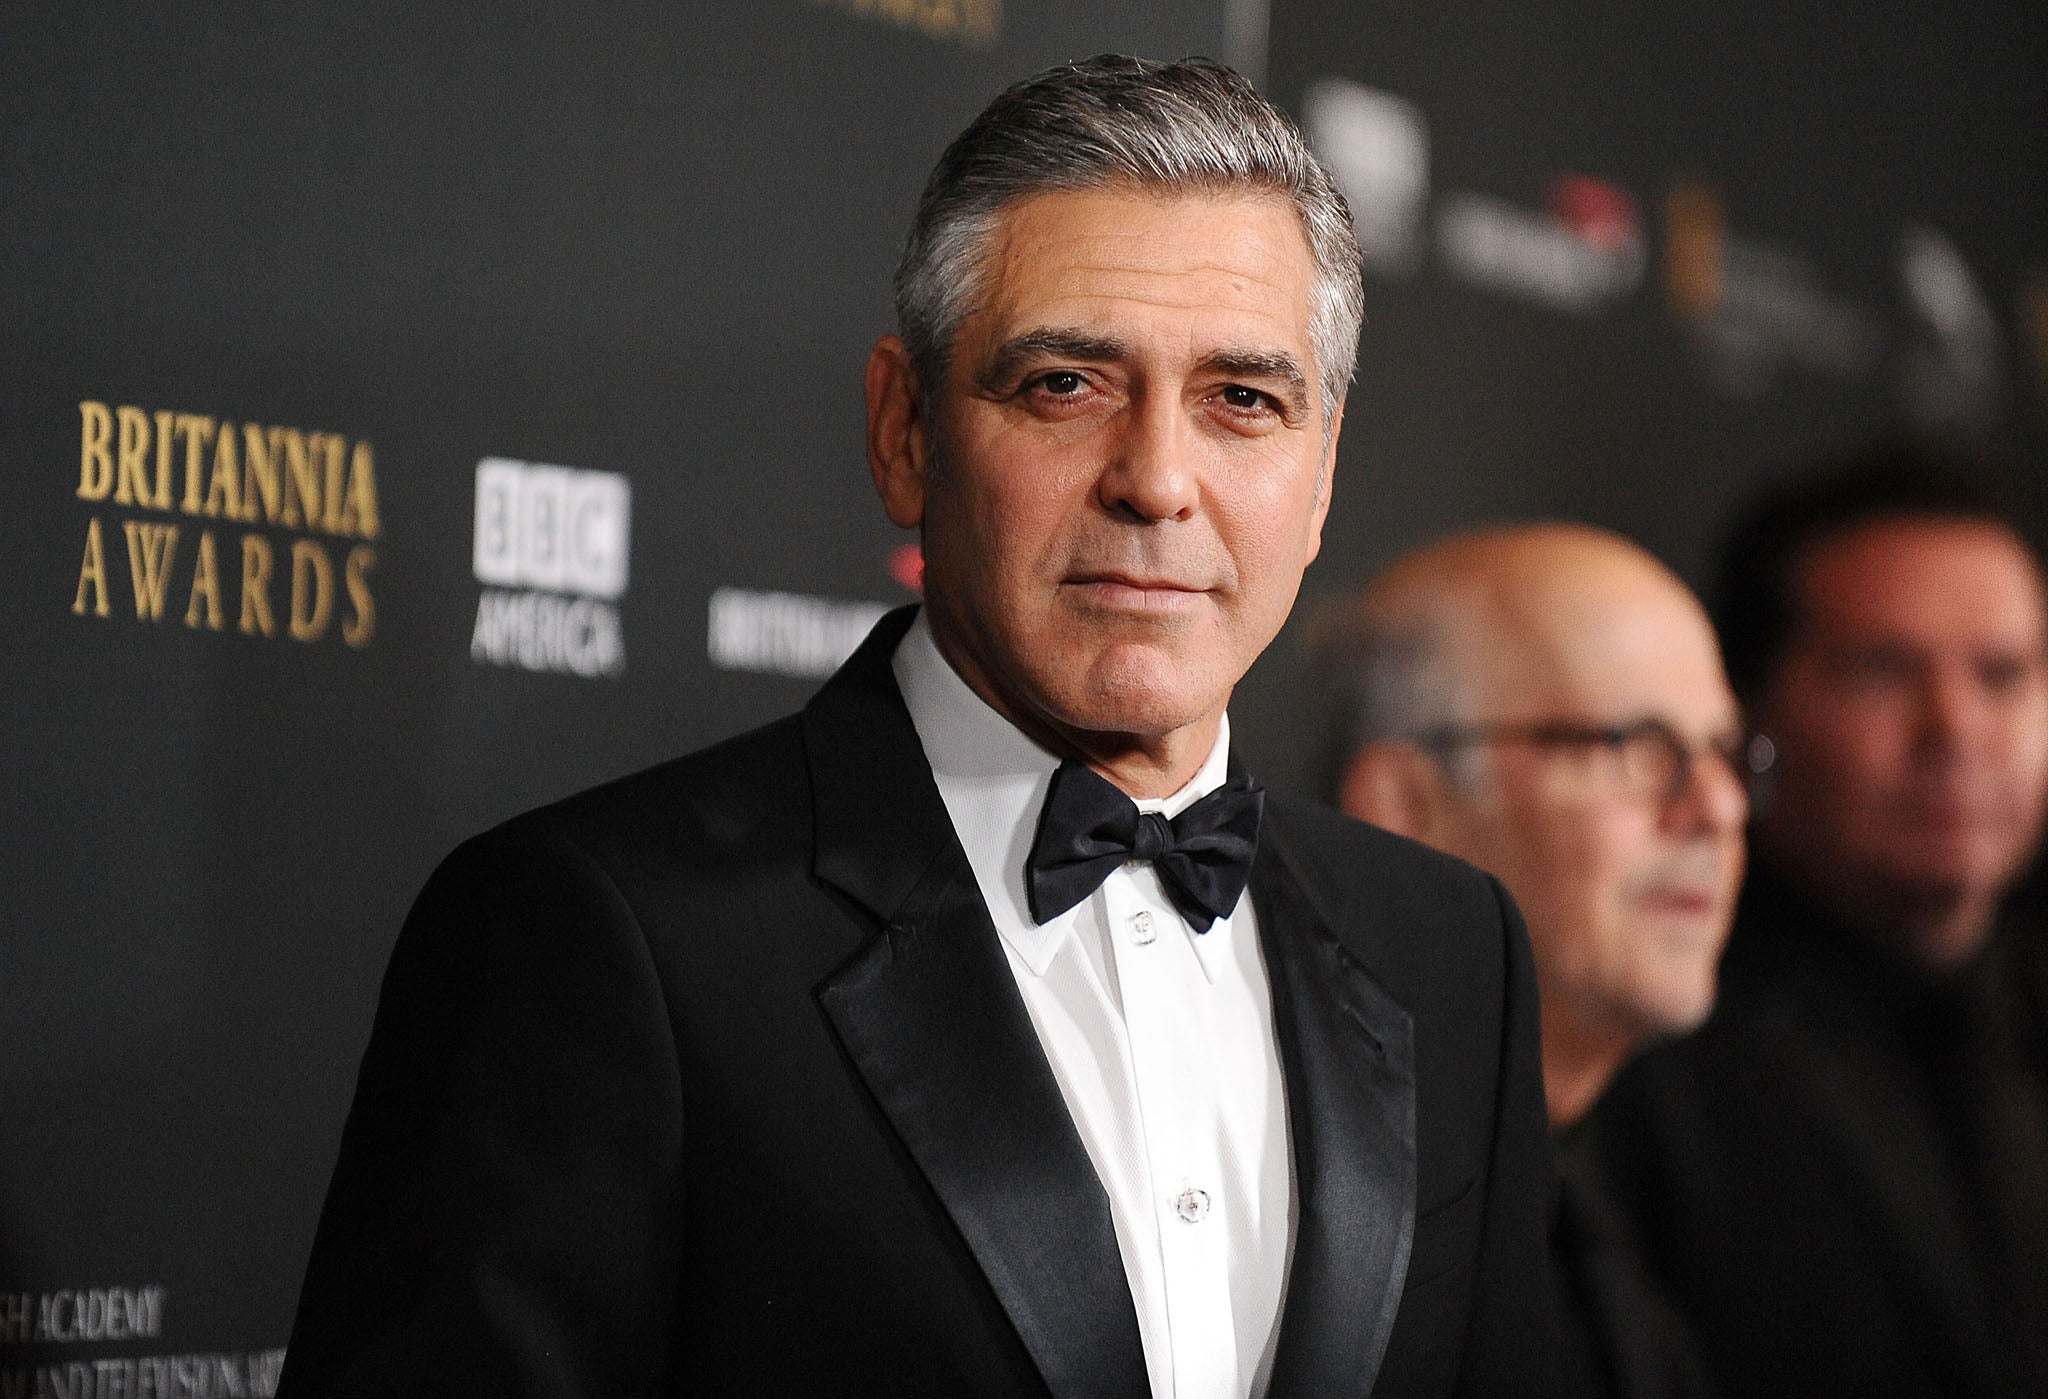 Kentucky native George Clooney said he is 'ashamed' of his home state after only one officer was charged in the killing of Breonna Taylor.